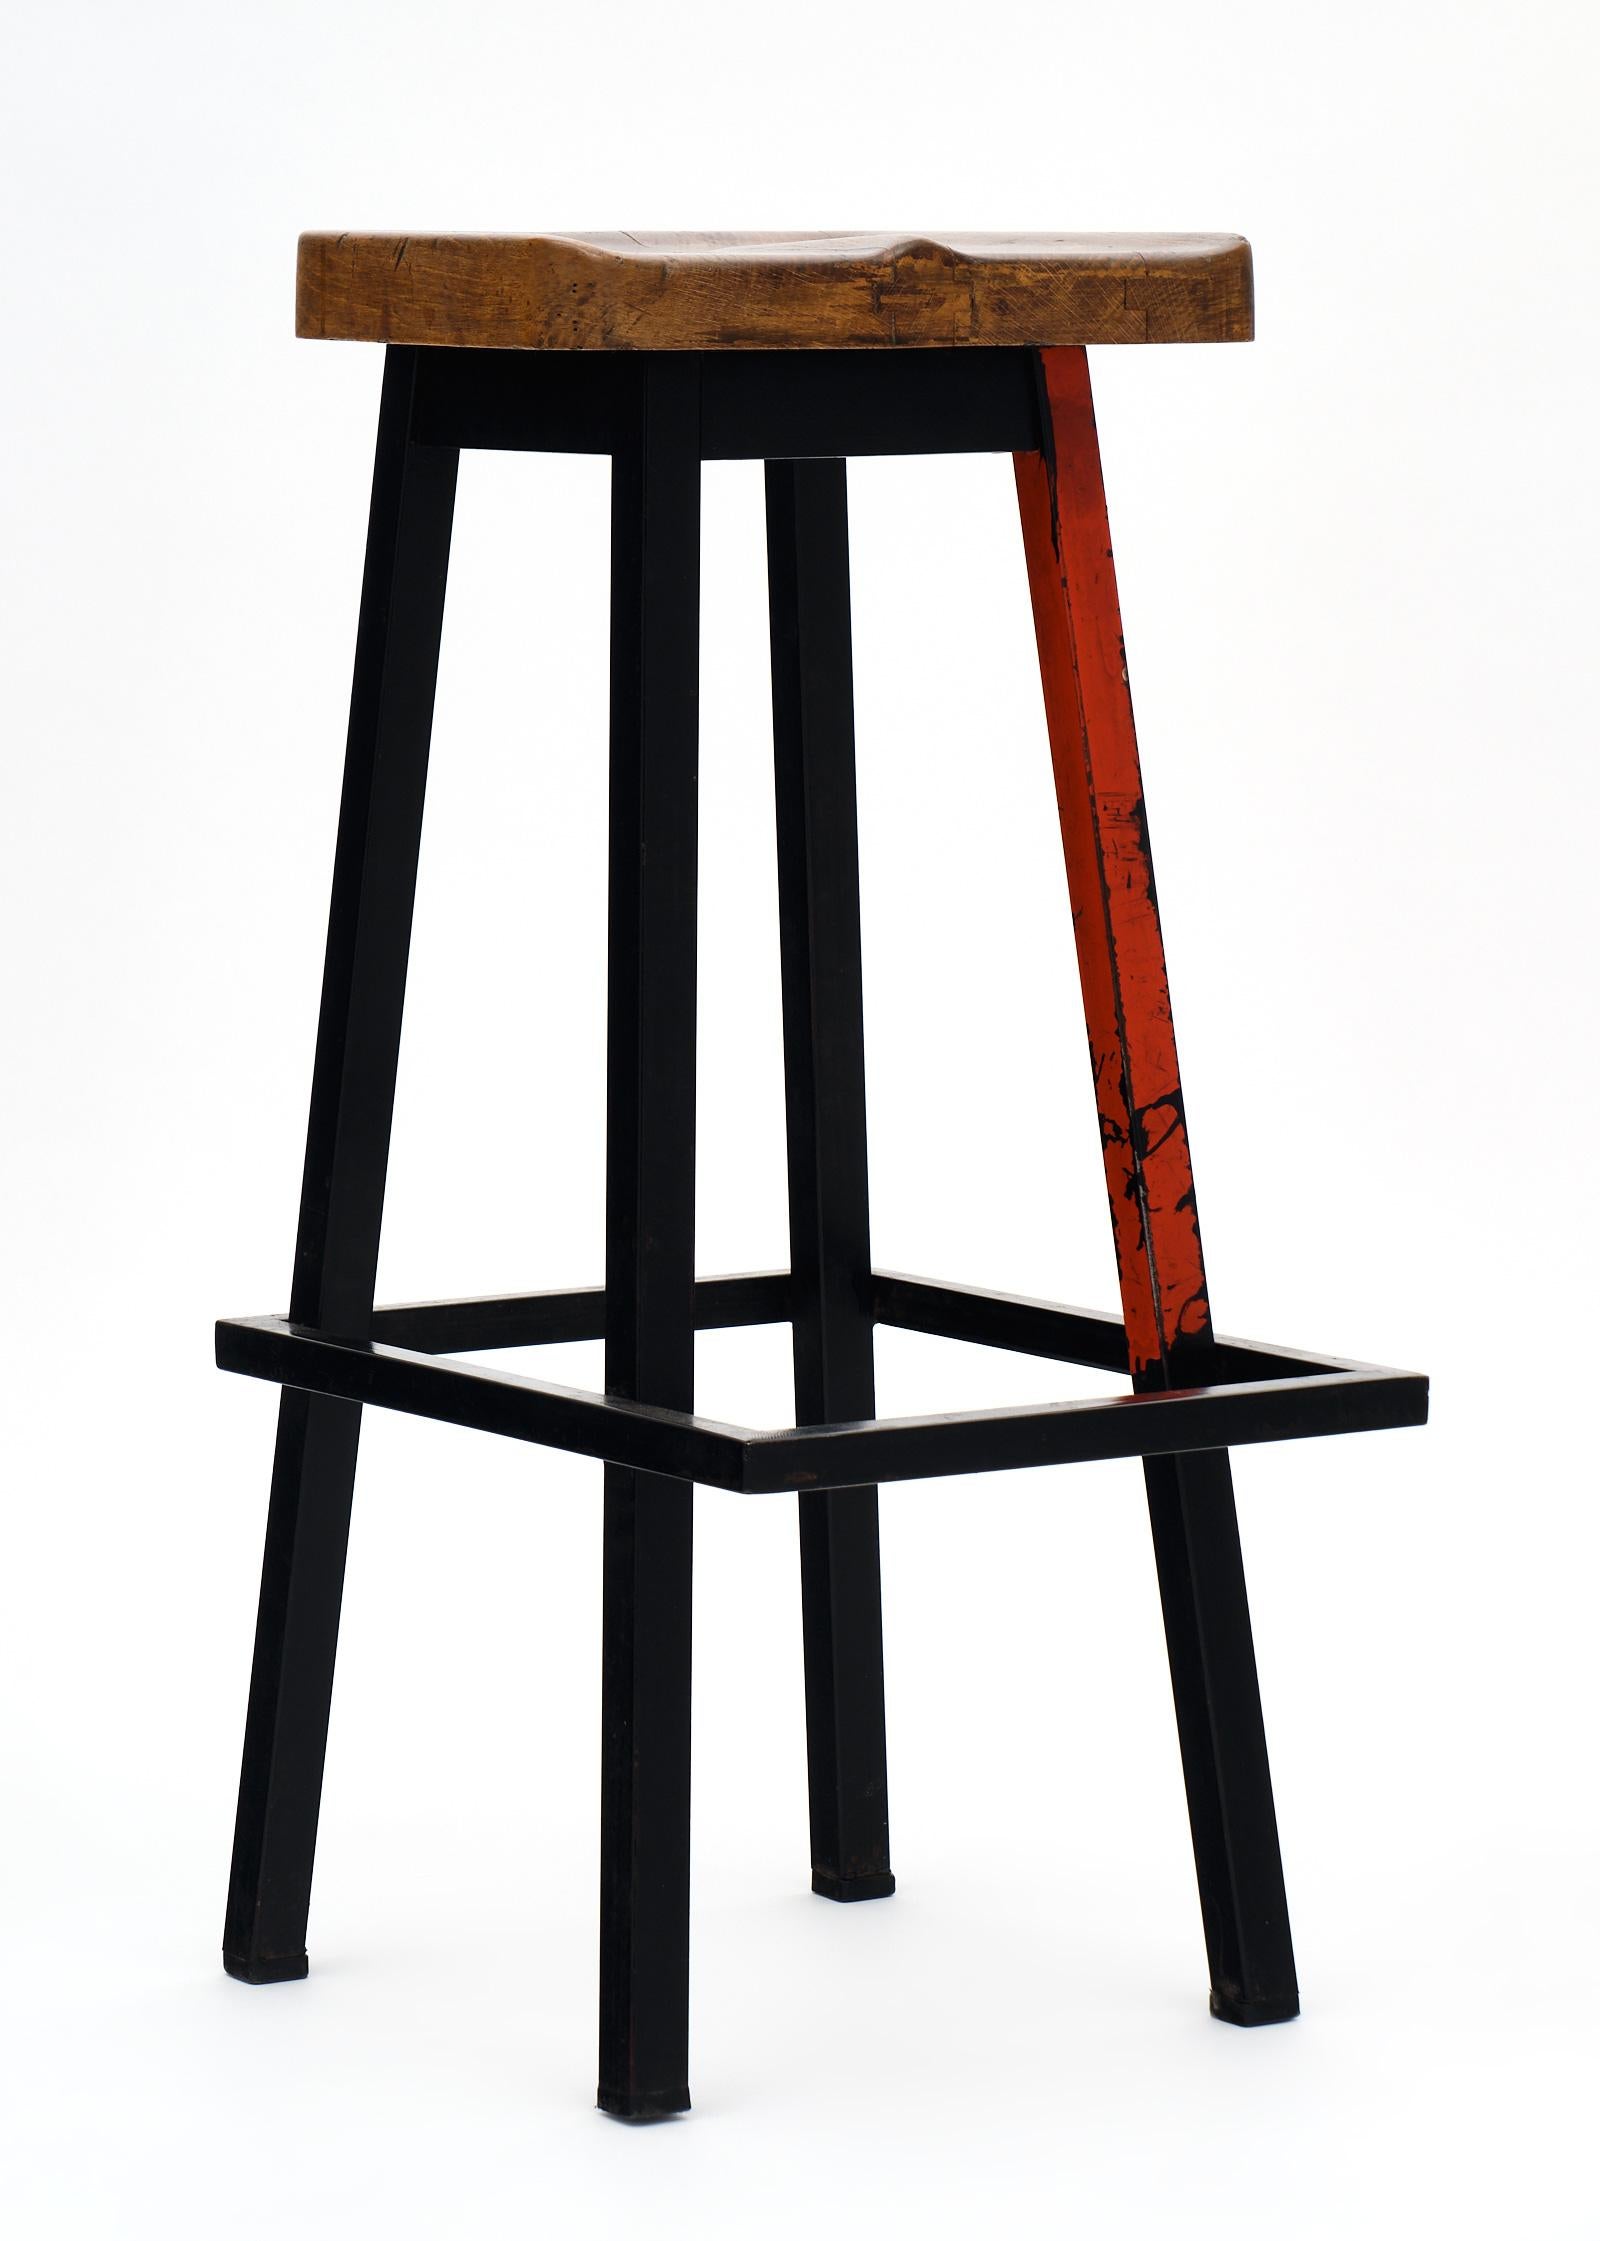 French industrial bar stools with polychrome steel structures and wood seats. The steel bases are black in color with red legs on each. We love the original patina and comfortable size. The price listed is for the set of eight, but could be sold as